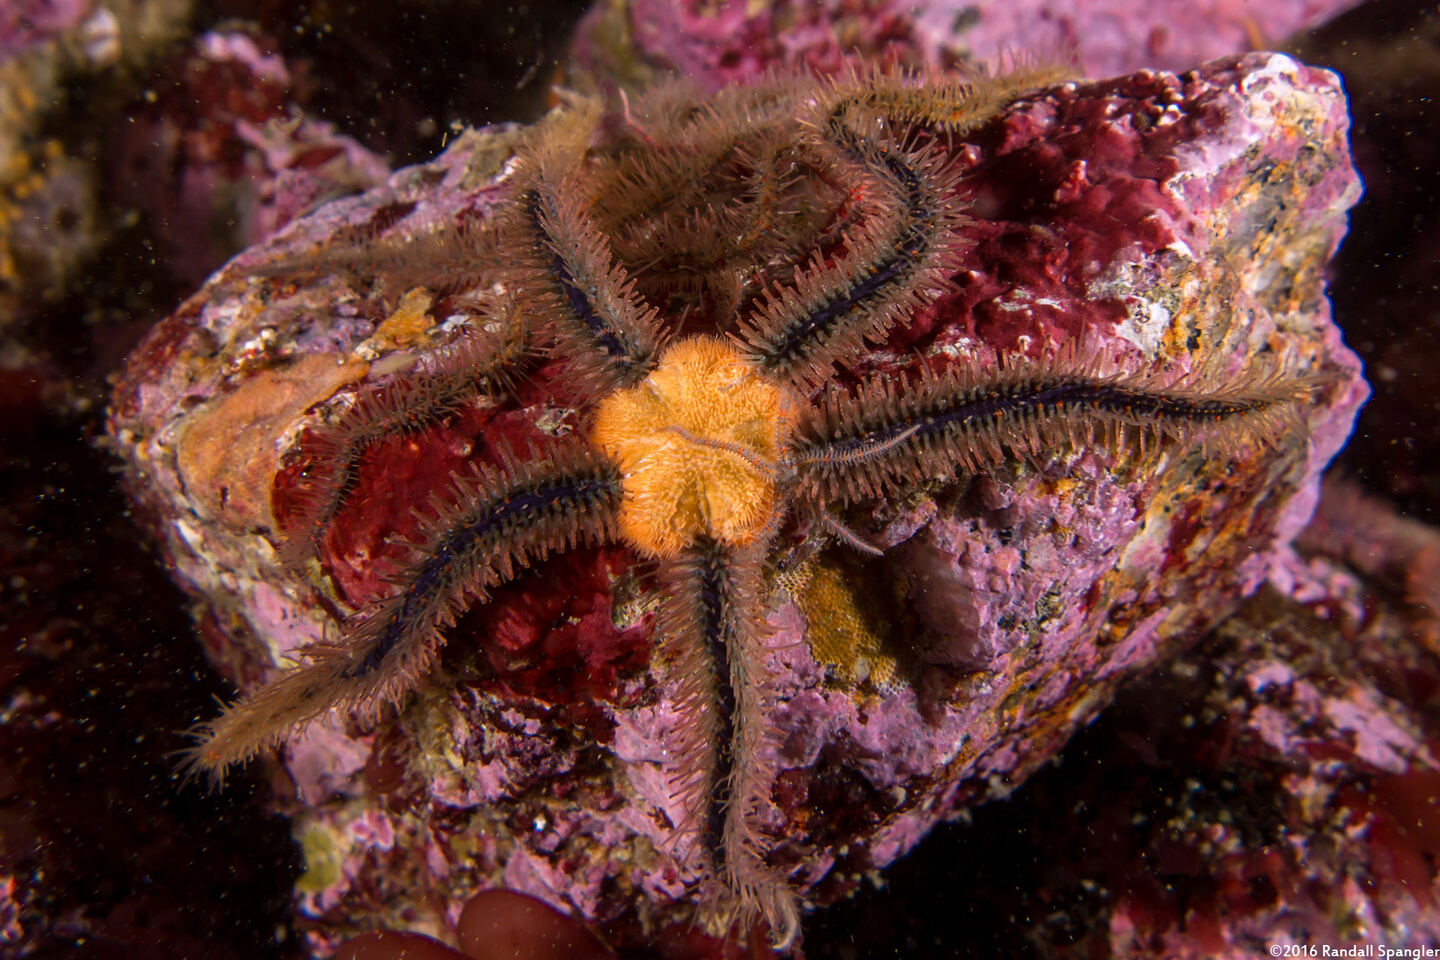 Ophiothrix spiculata (Spiny Brittle Star); This one has a tiny brittle star crawling on it (Brittle star inception!)